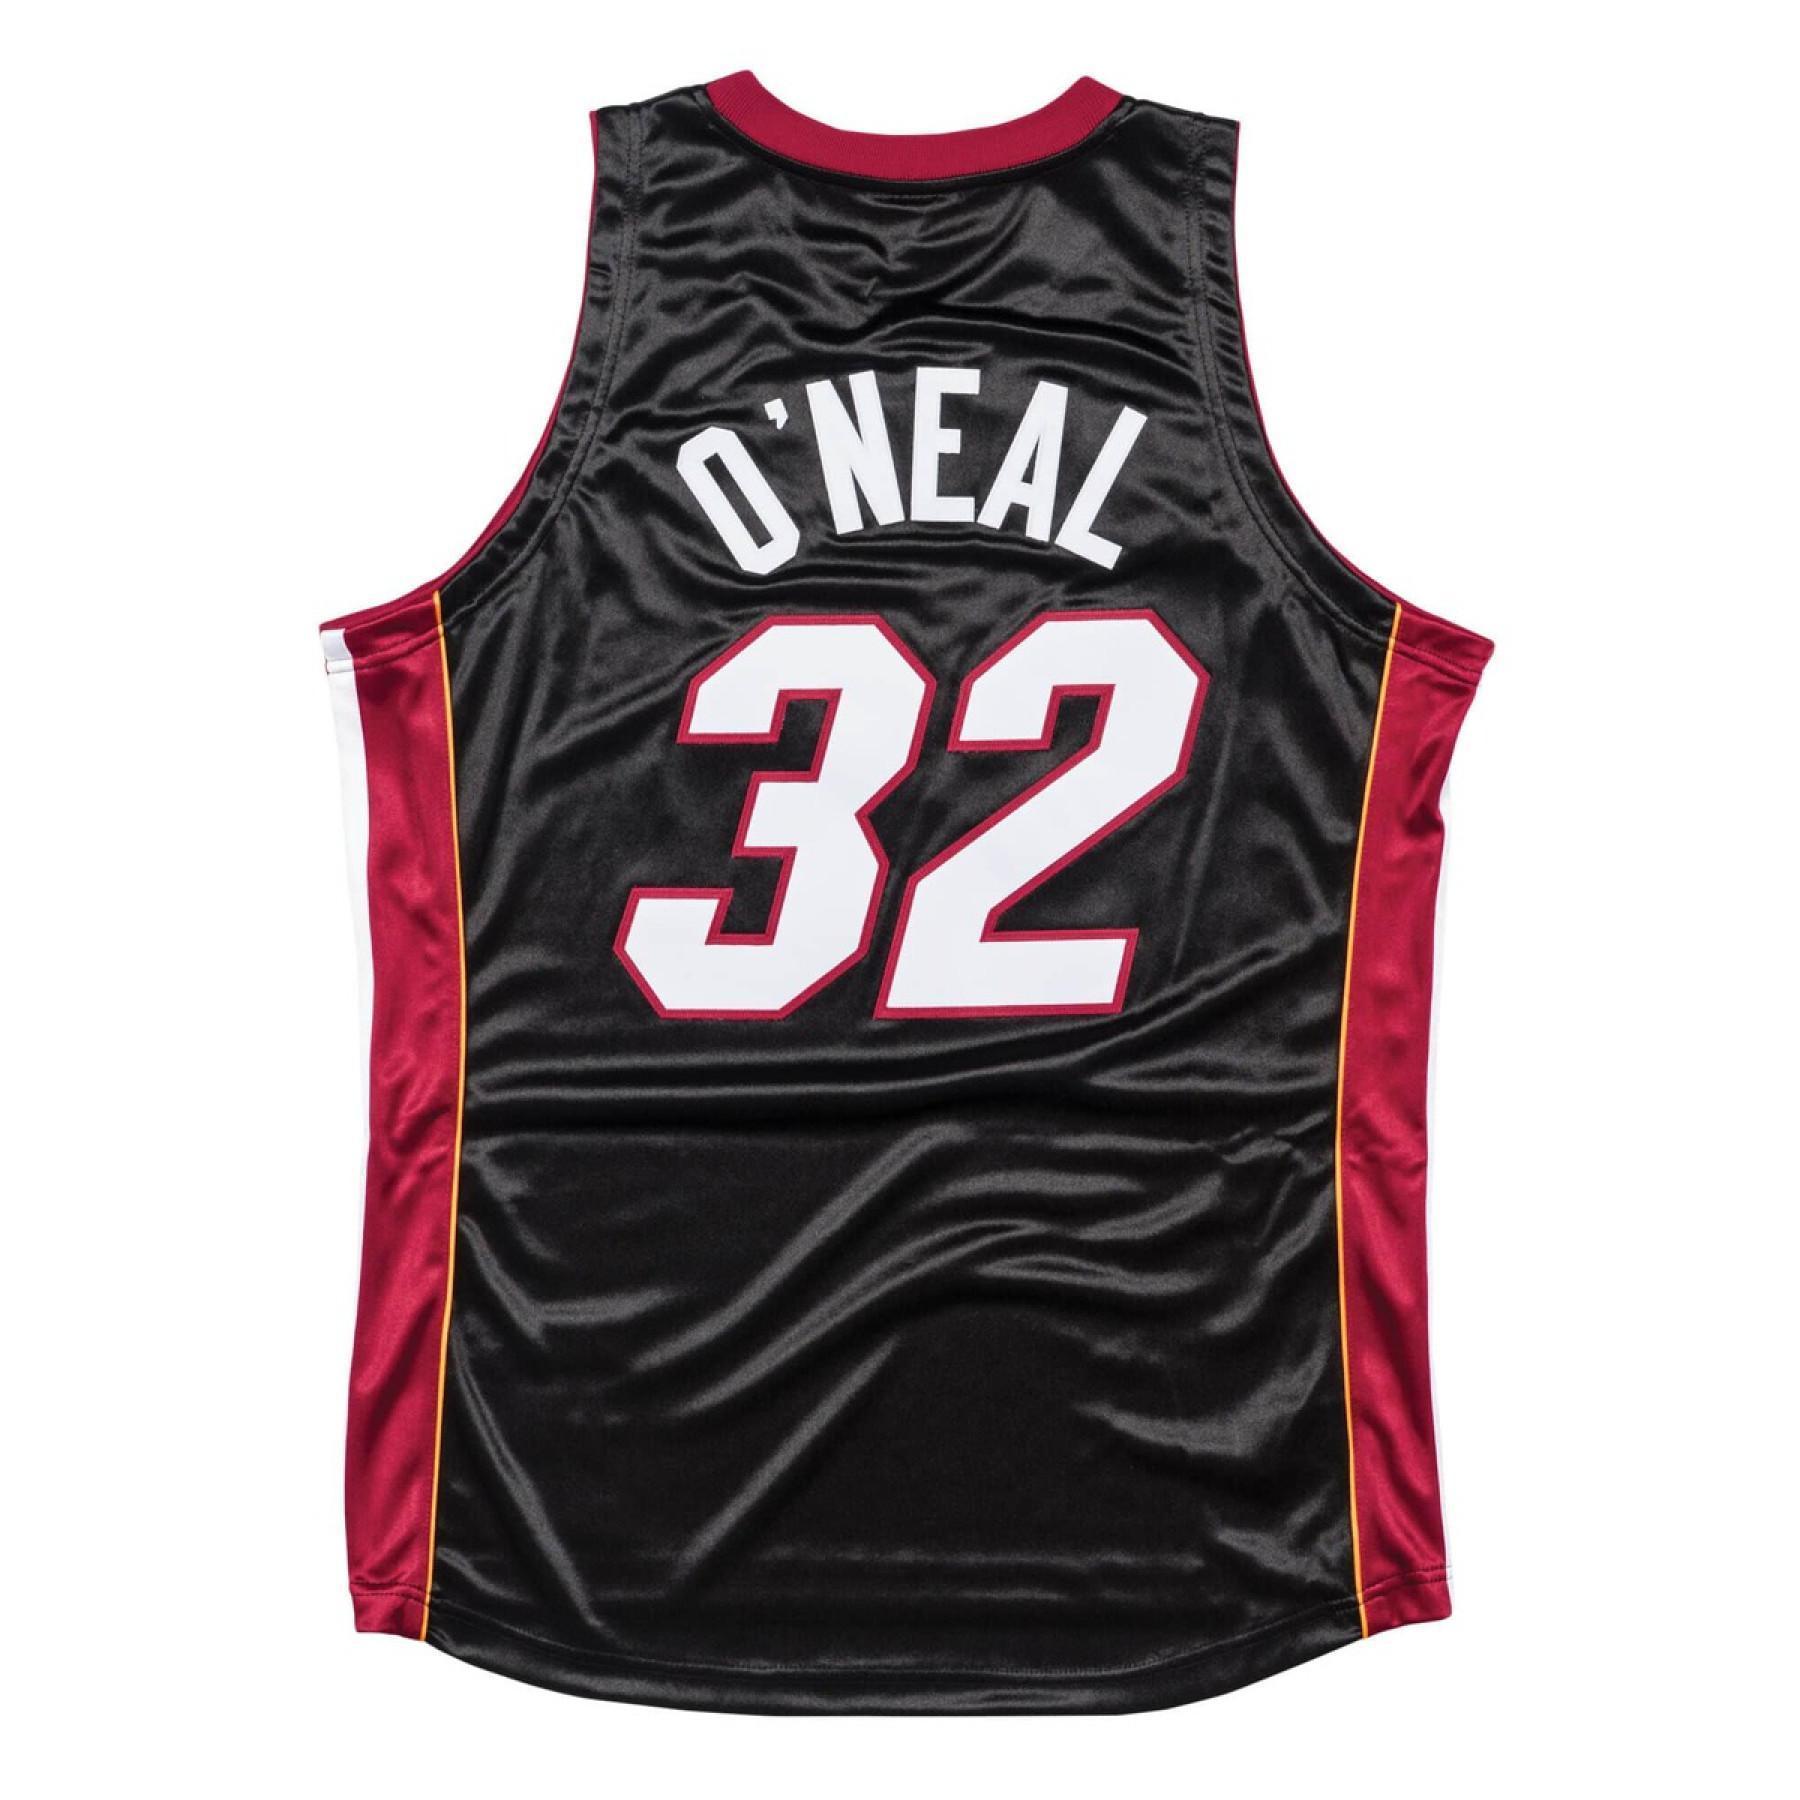 Authentic Jersey Miami Heats Shaquille O'Neal 2005/06